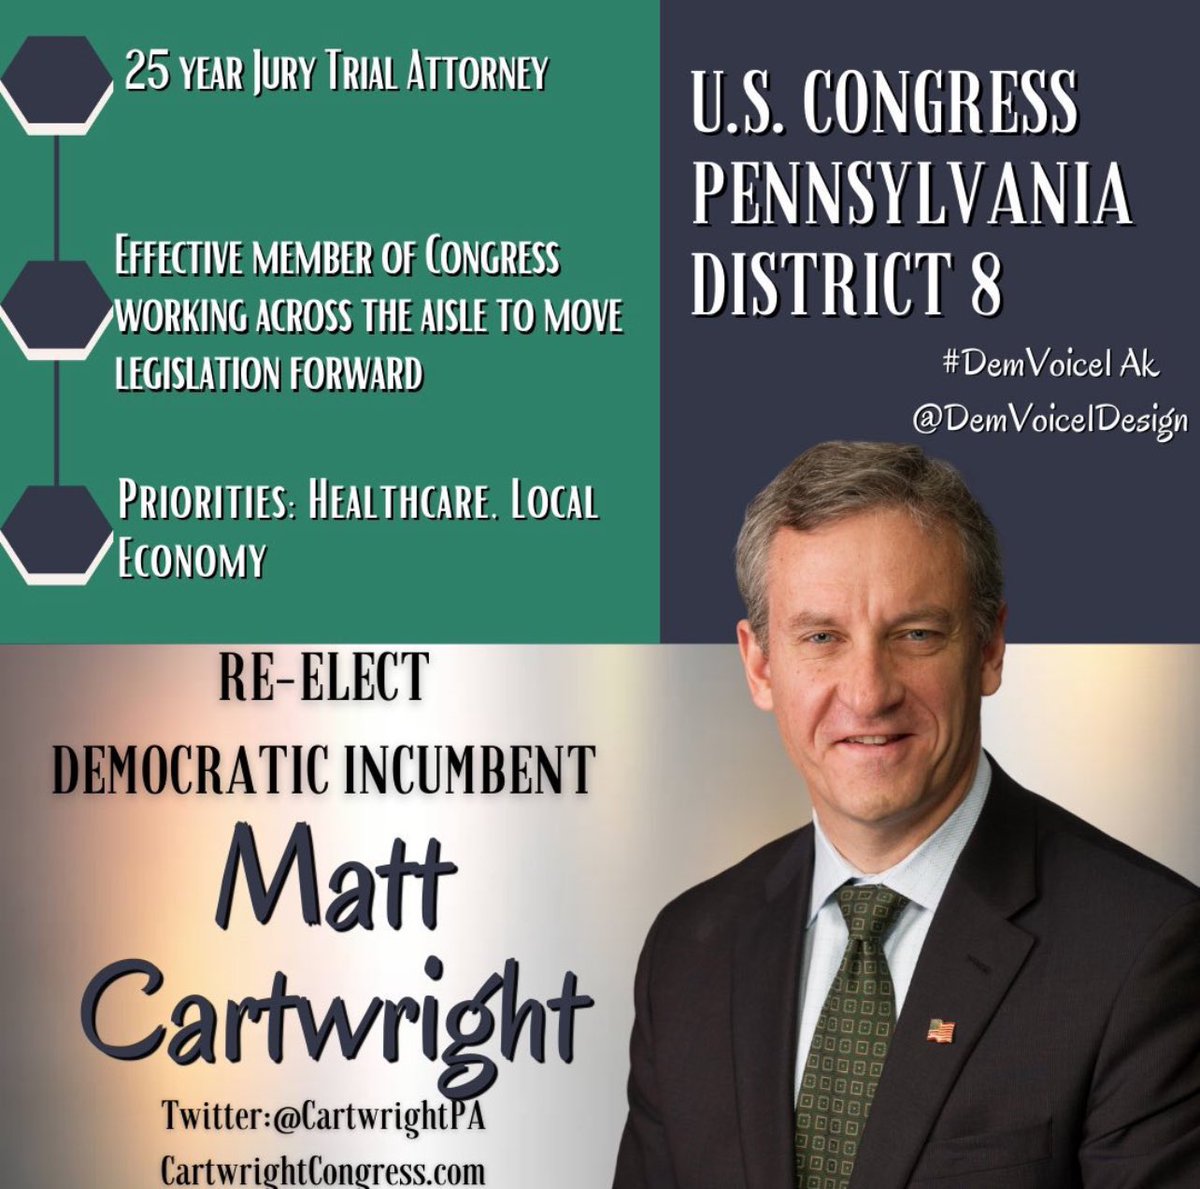 #DemVoice1 #DemsUnited Matt Cartwright (D) PA-08 @CartwrightPA, who was first sworn into the US Congress in 2013 is seeking re-election this year. “Matt Cartwright has spent his entire career sticking up for working people, first as a trial attorney and now as the Congressman…